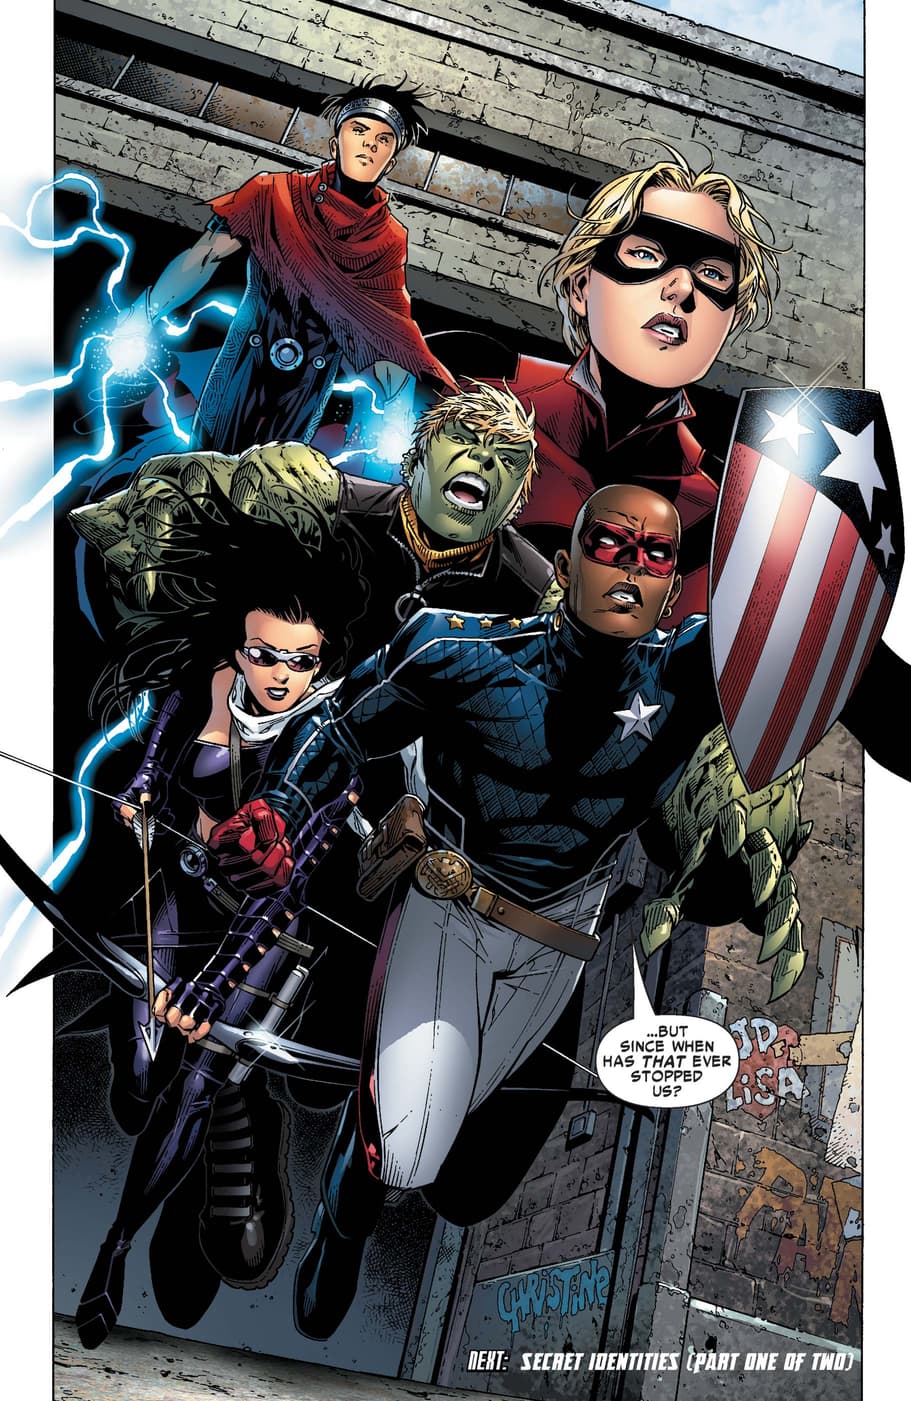 YOUNG AVENGERS (2005) #6 Stature (Cassie Lang) with Young Avengers